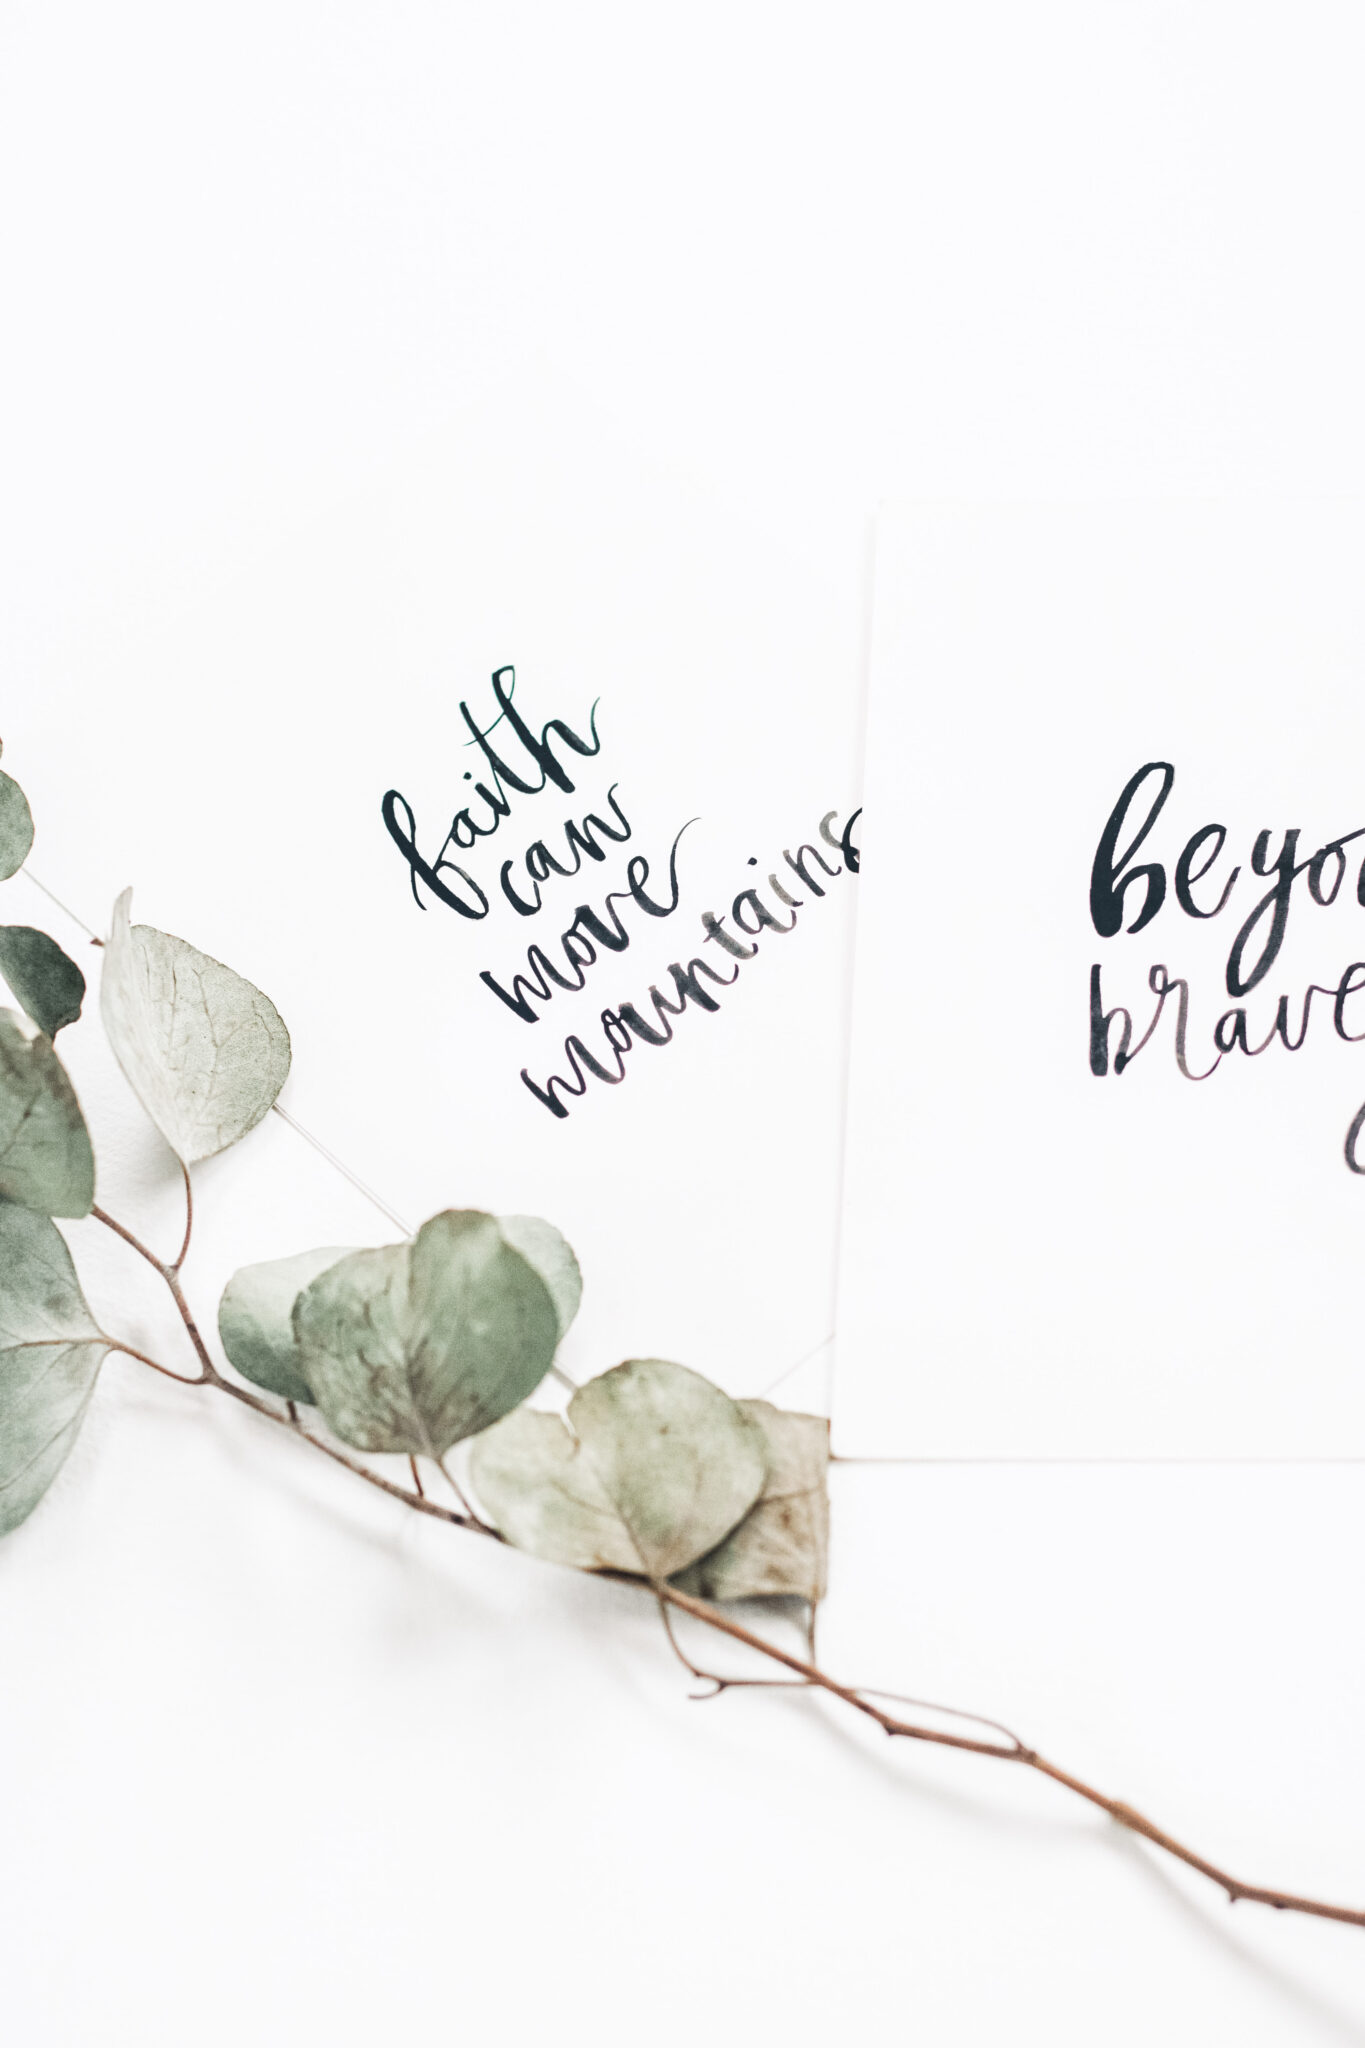 Two black and white faith-inspired posters written in cursive. On the side is a sprig of eucalyptus.  This article covers practical ways to encourage your kids to develop faith.